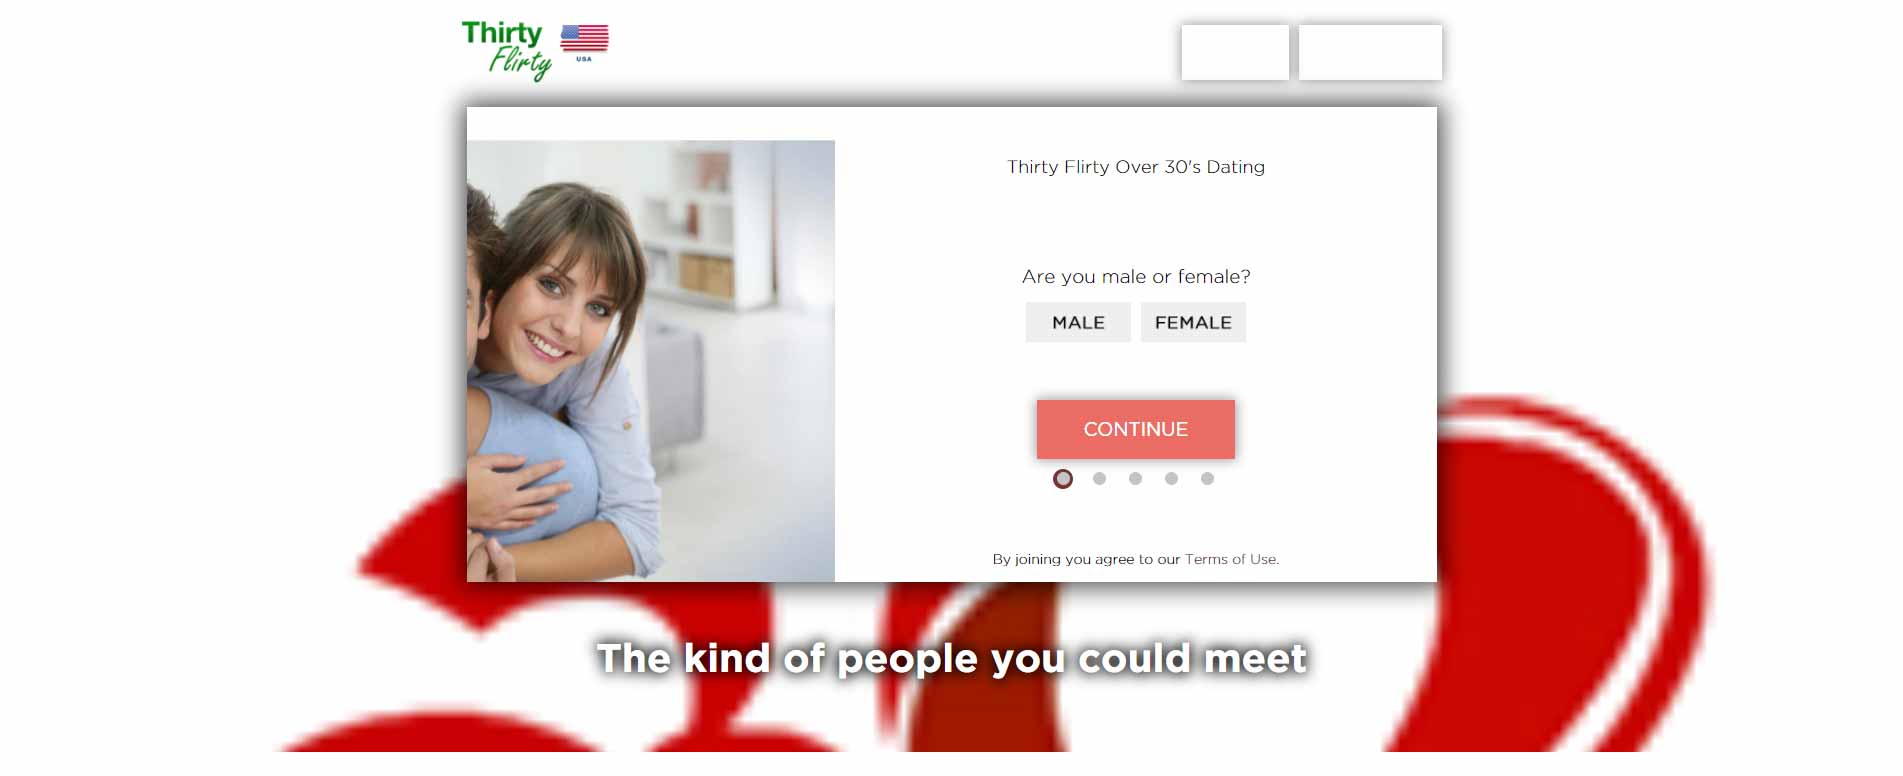 Thirty Flirty home for international dating site review